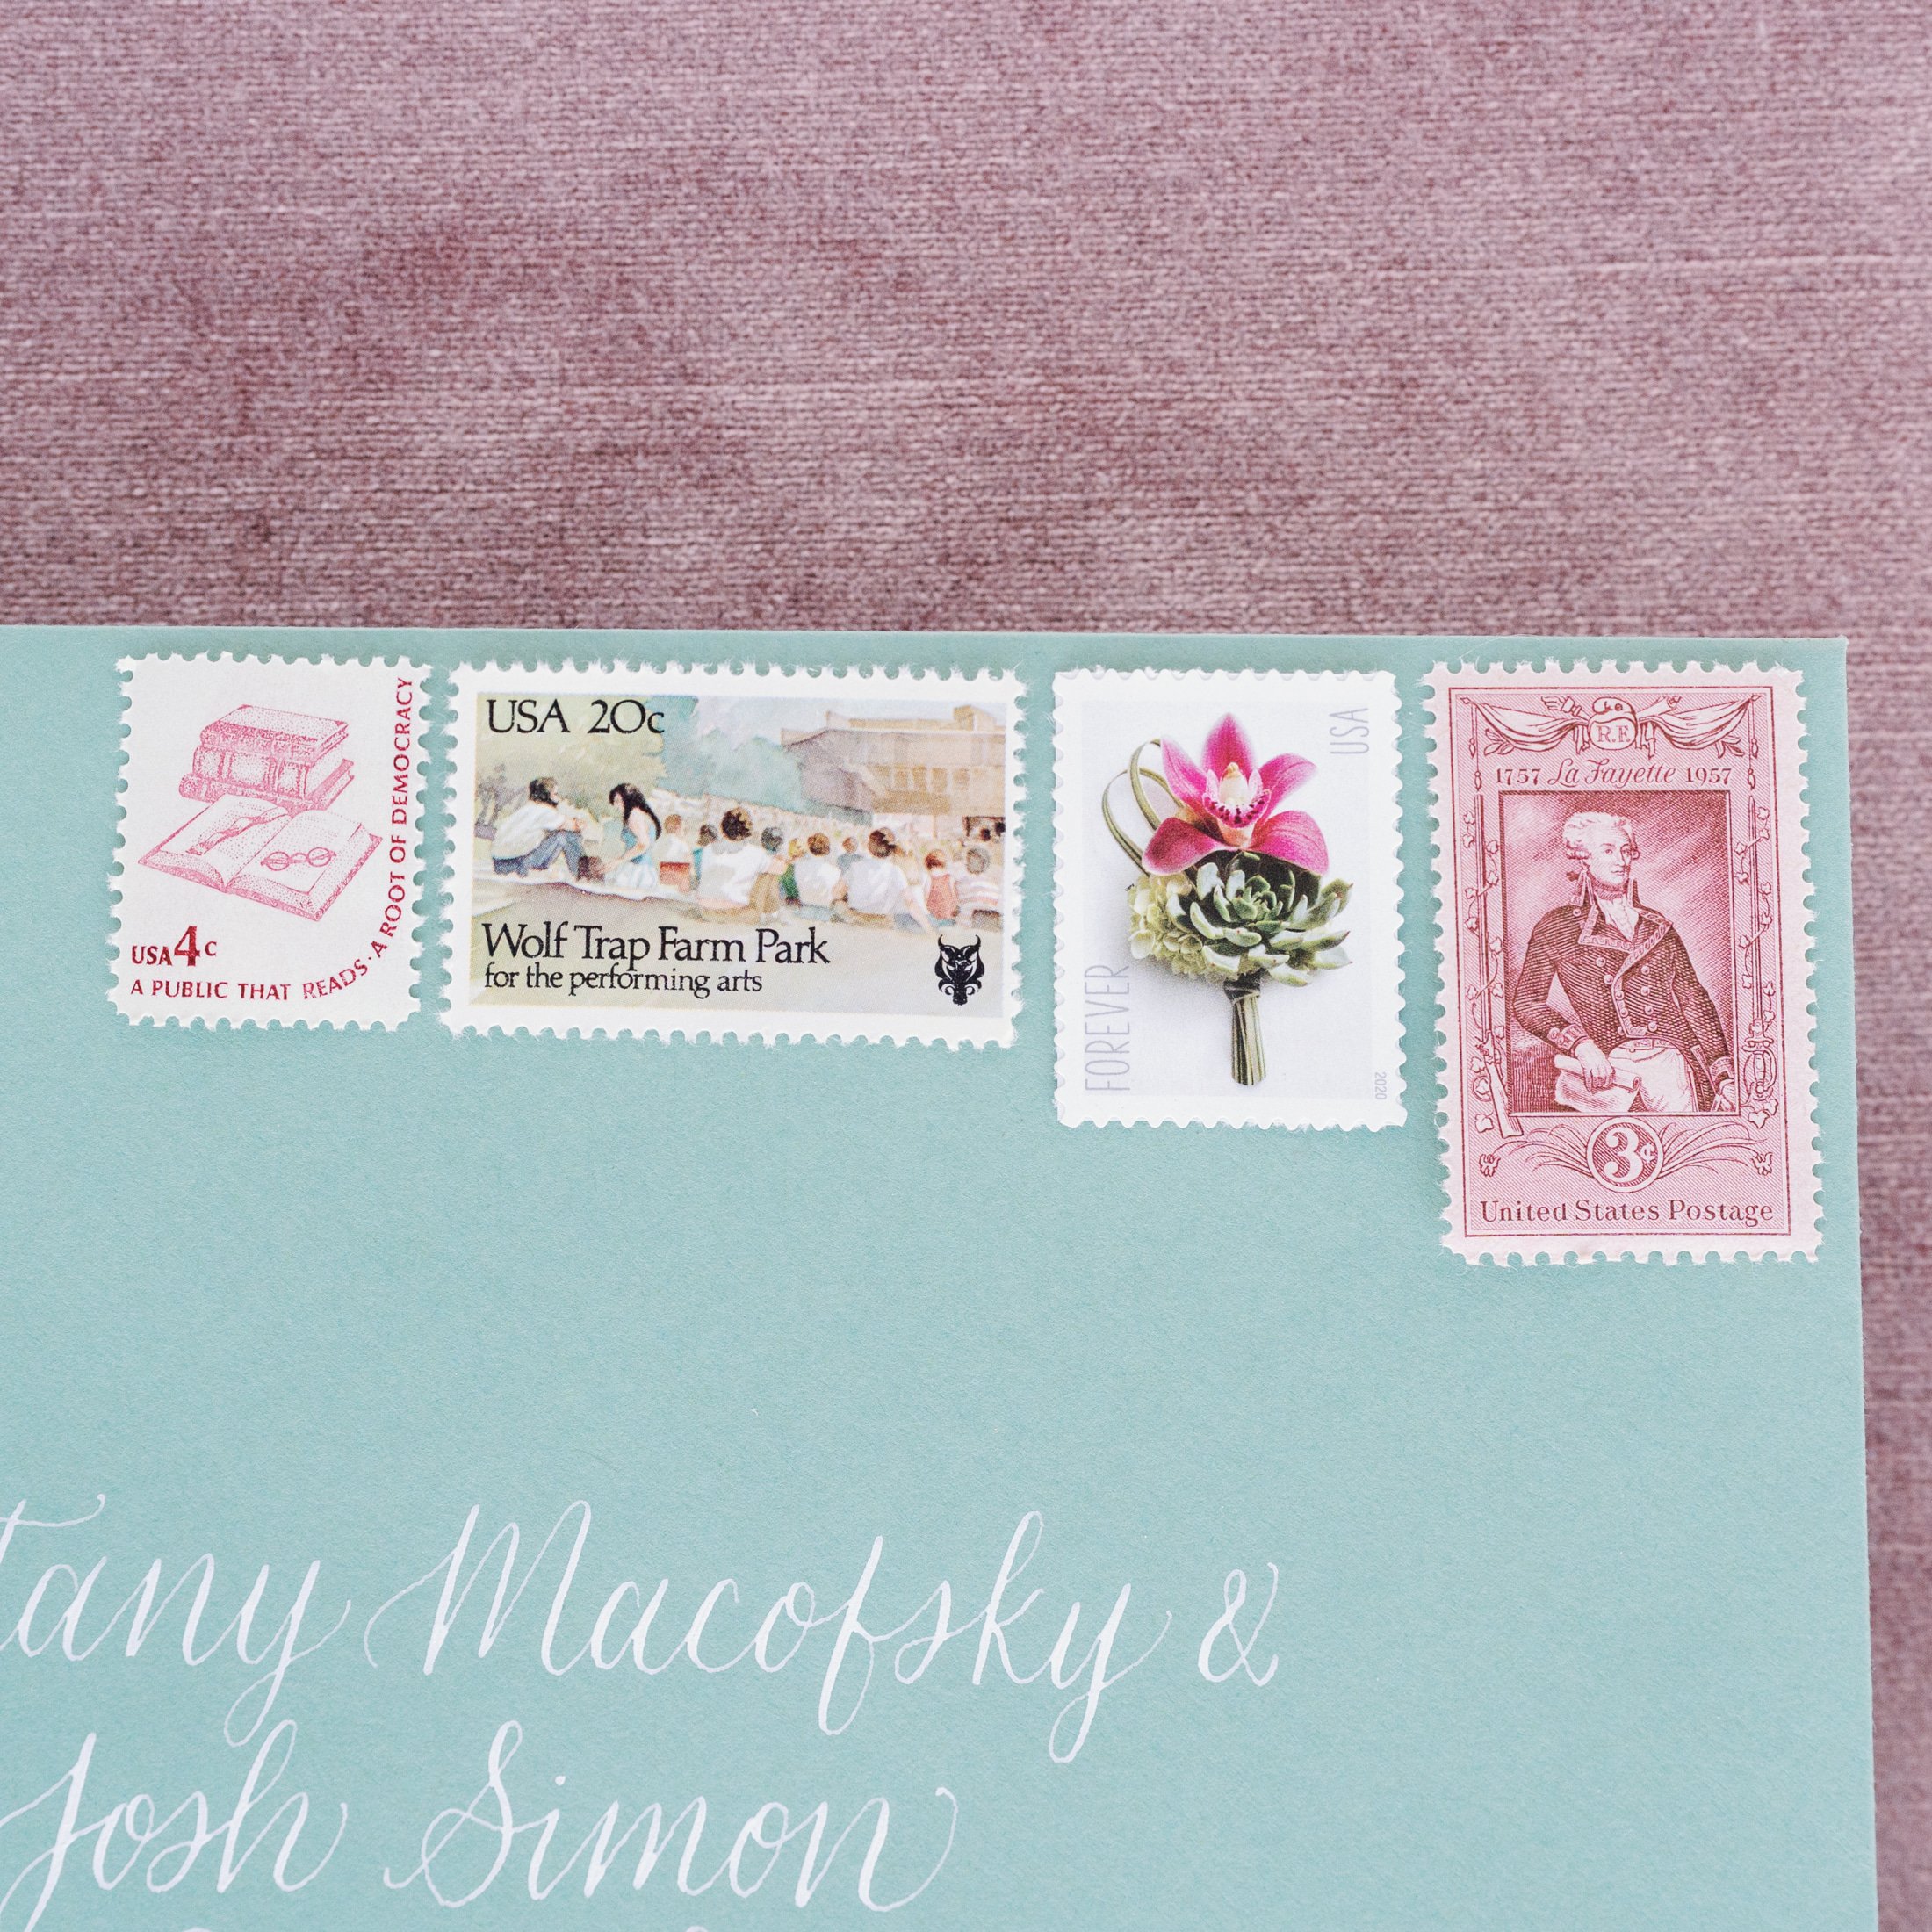 Custom Wedding Postage Stamps to be Discontinued